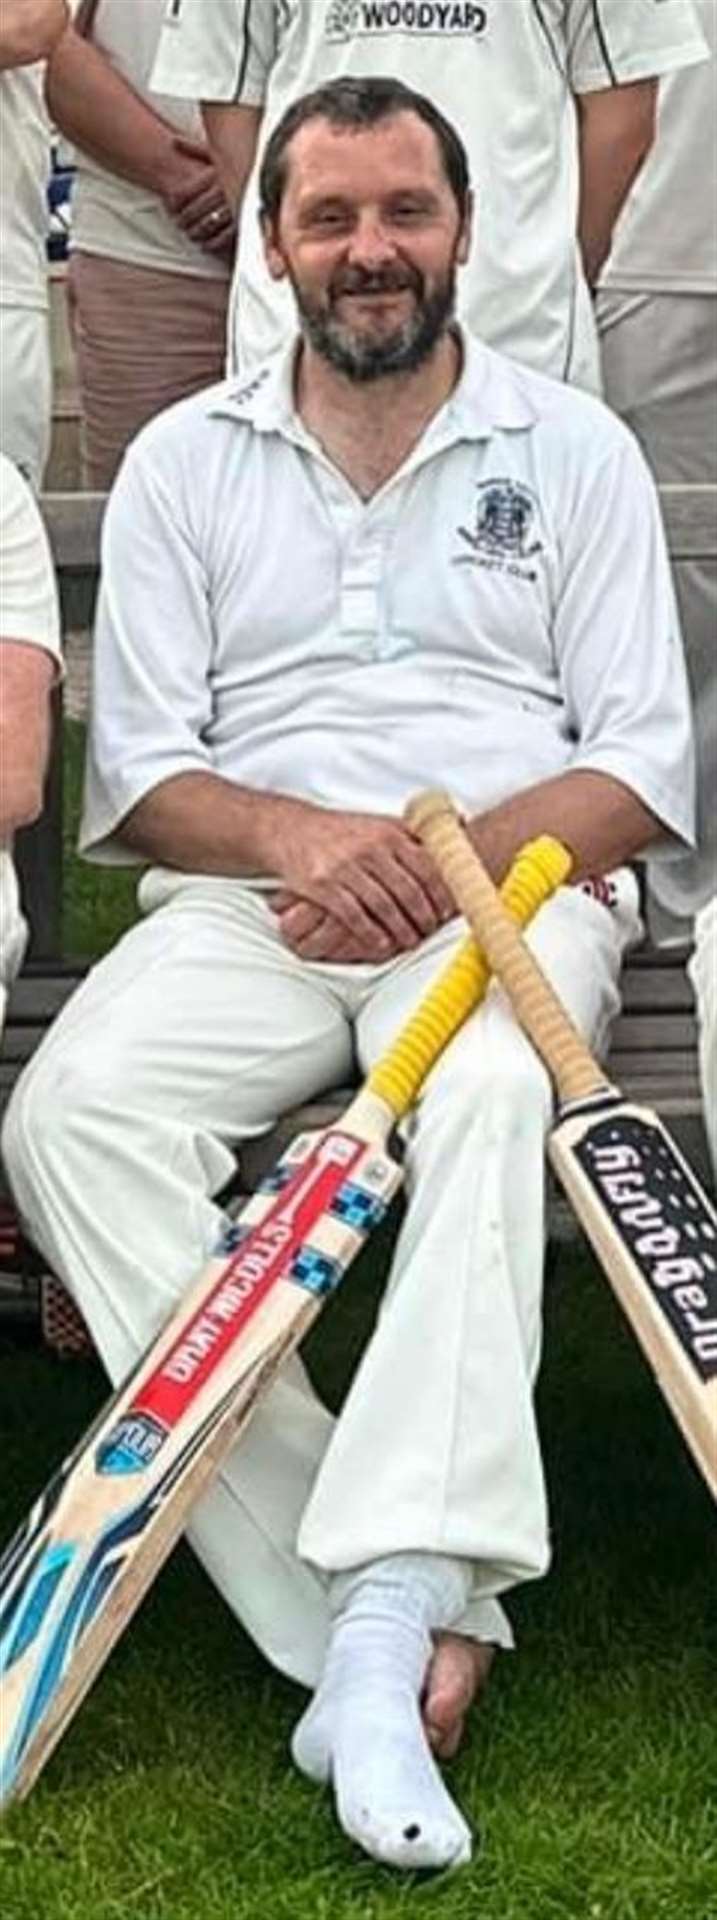 David Barlow was a cricketer for Hampstead Norreys Cricket Club (Hampstead Norreys Cricket Club/PA)